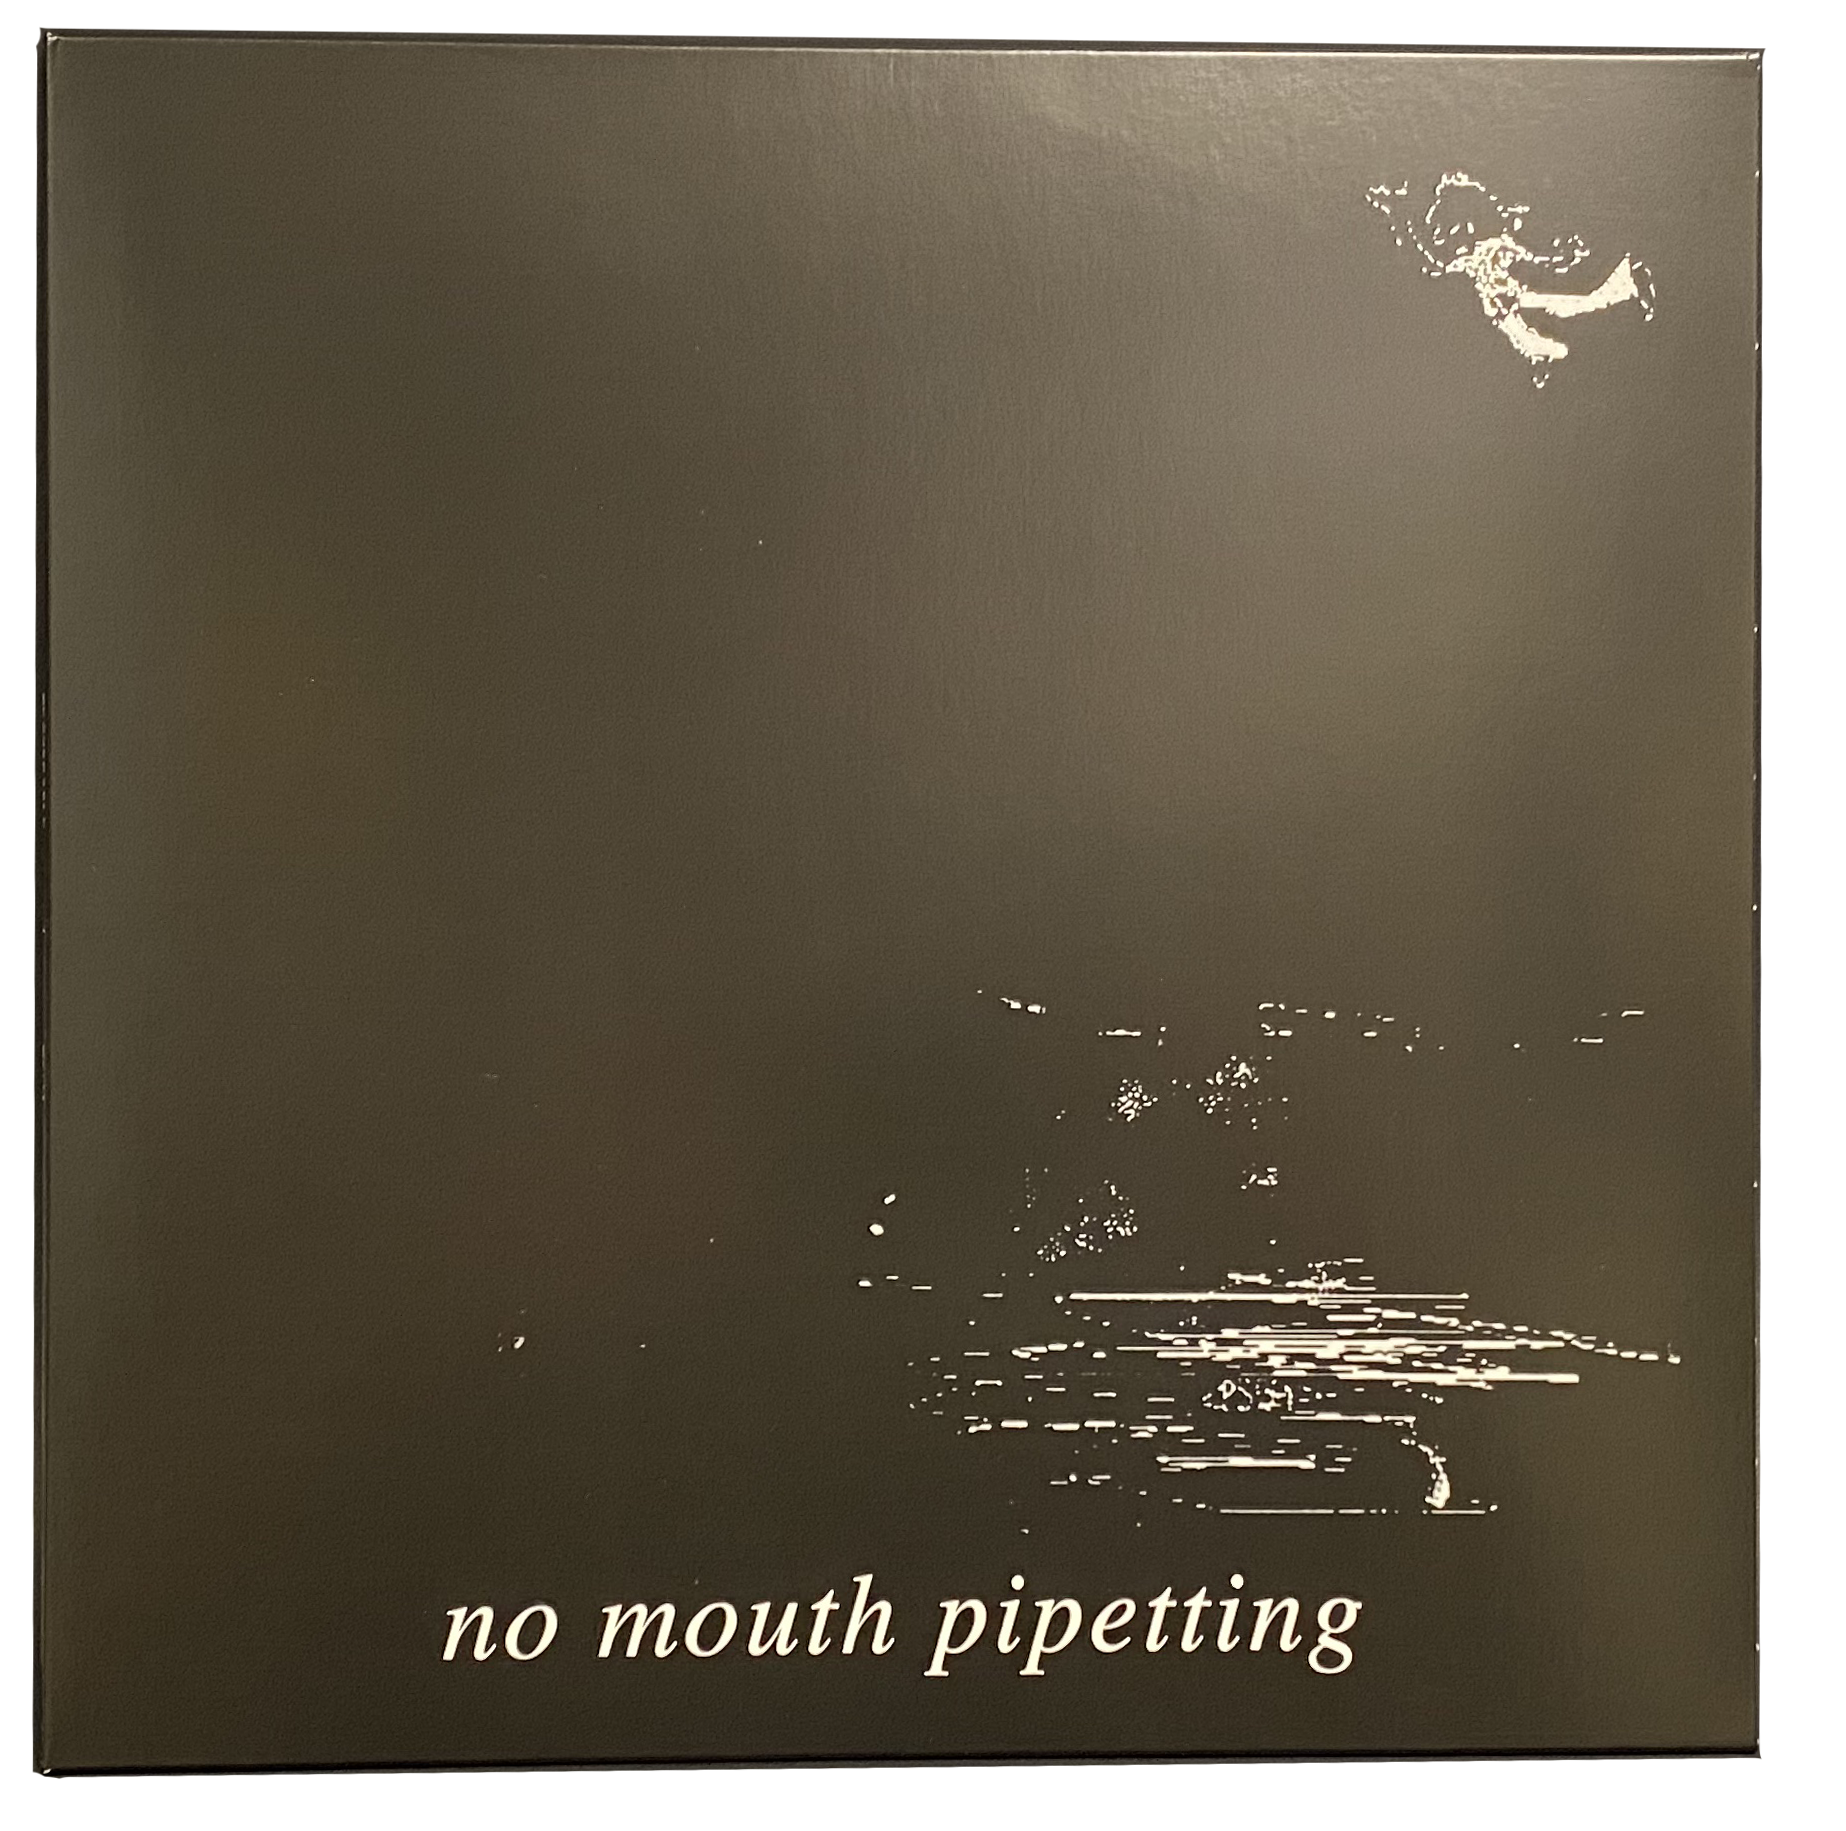 TREEPEOPLE "NO MOUTH PIPETTING" LP LIMITED EDITION WHITE VINYL